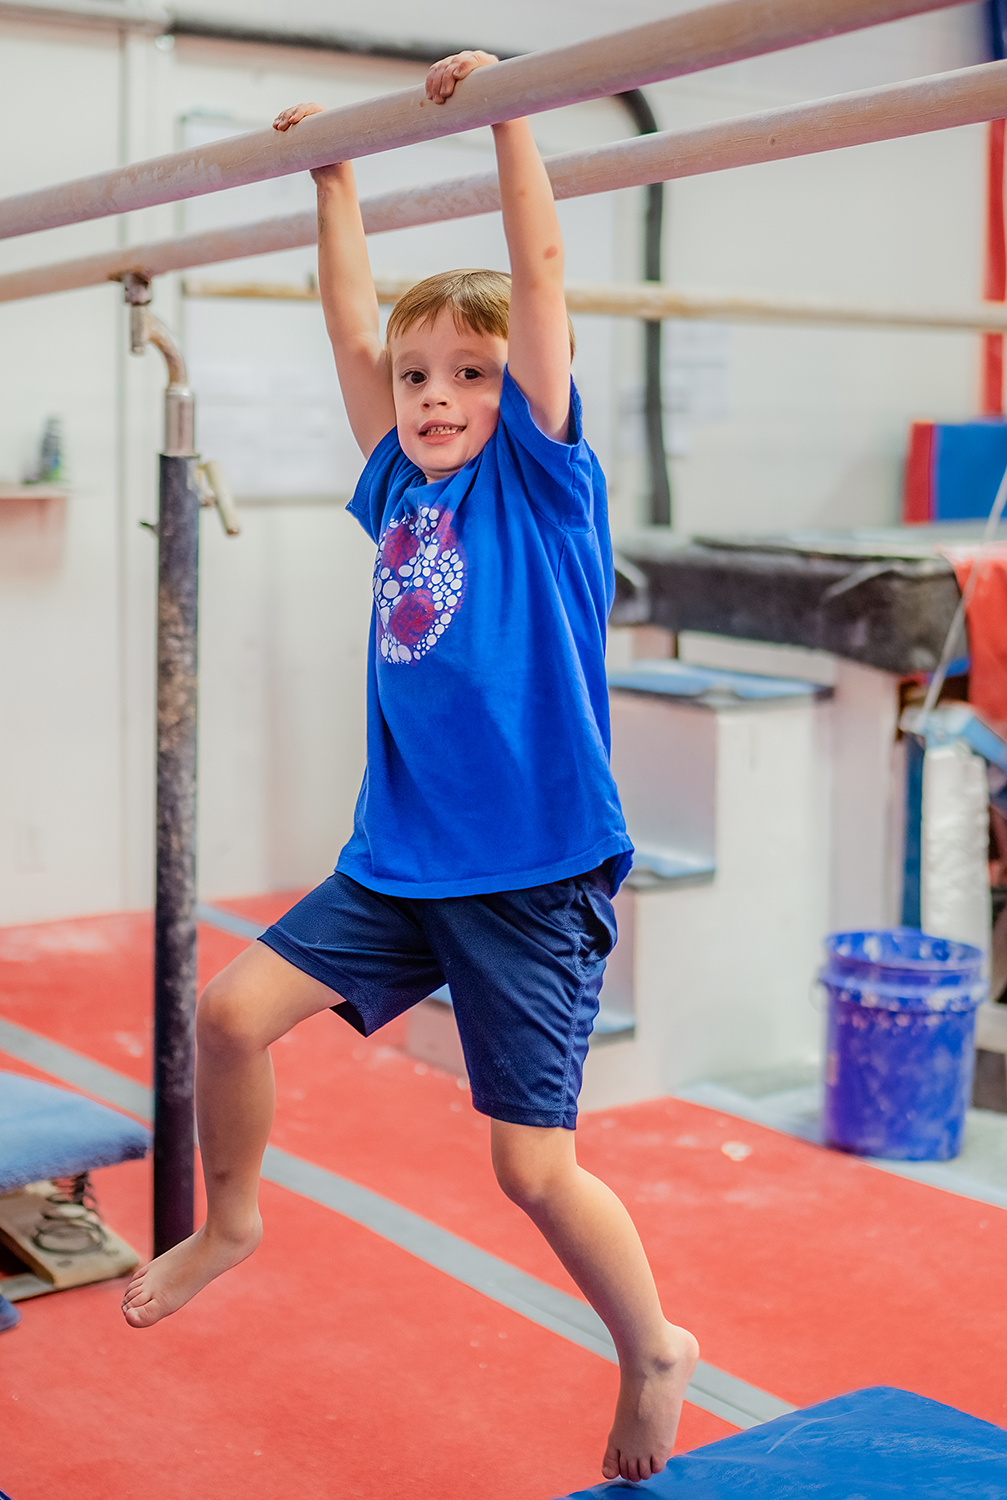 A young boy hands from the parallel bars during a class.